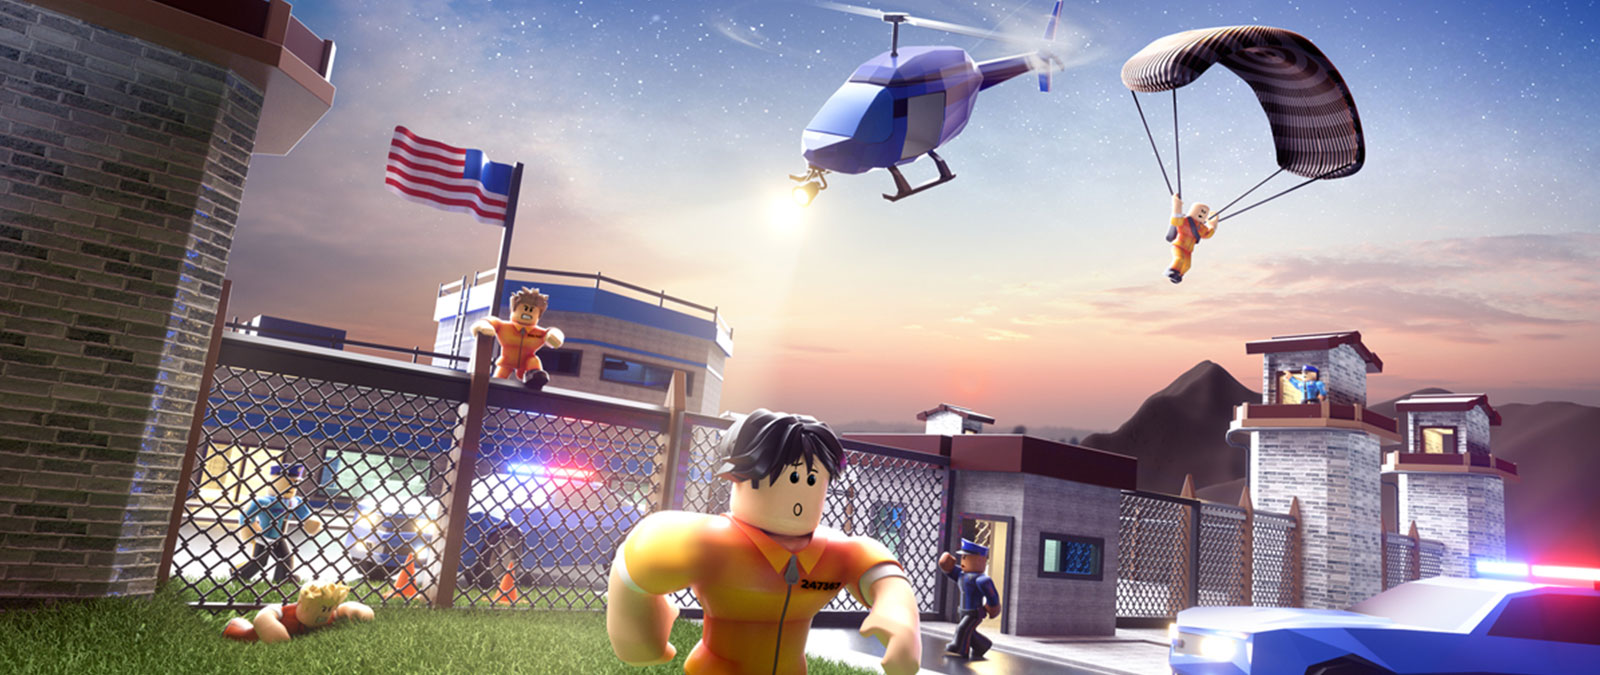 Roblox characters escaping from jail while police chase after them in Jailbreak game